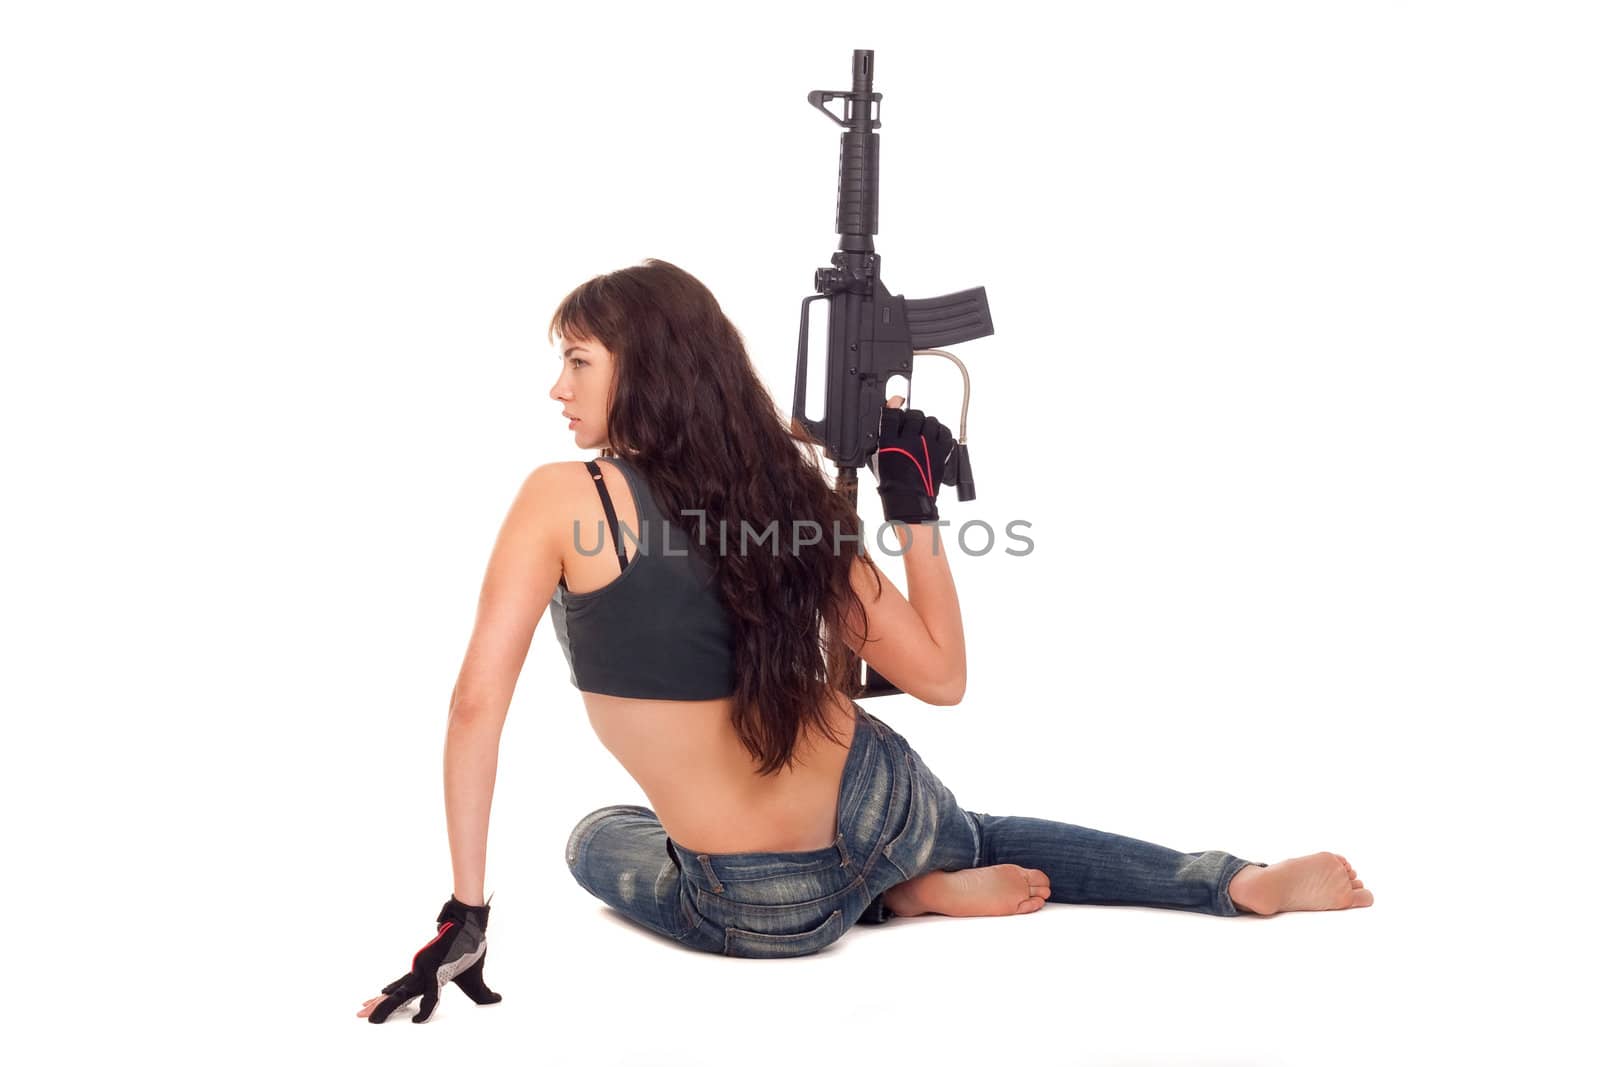 Image of a posing girl with a rifle